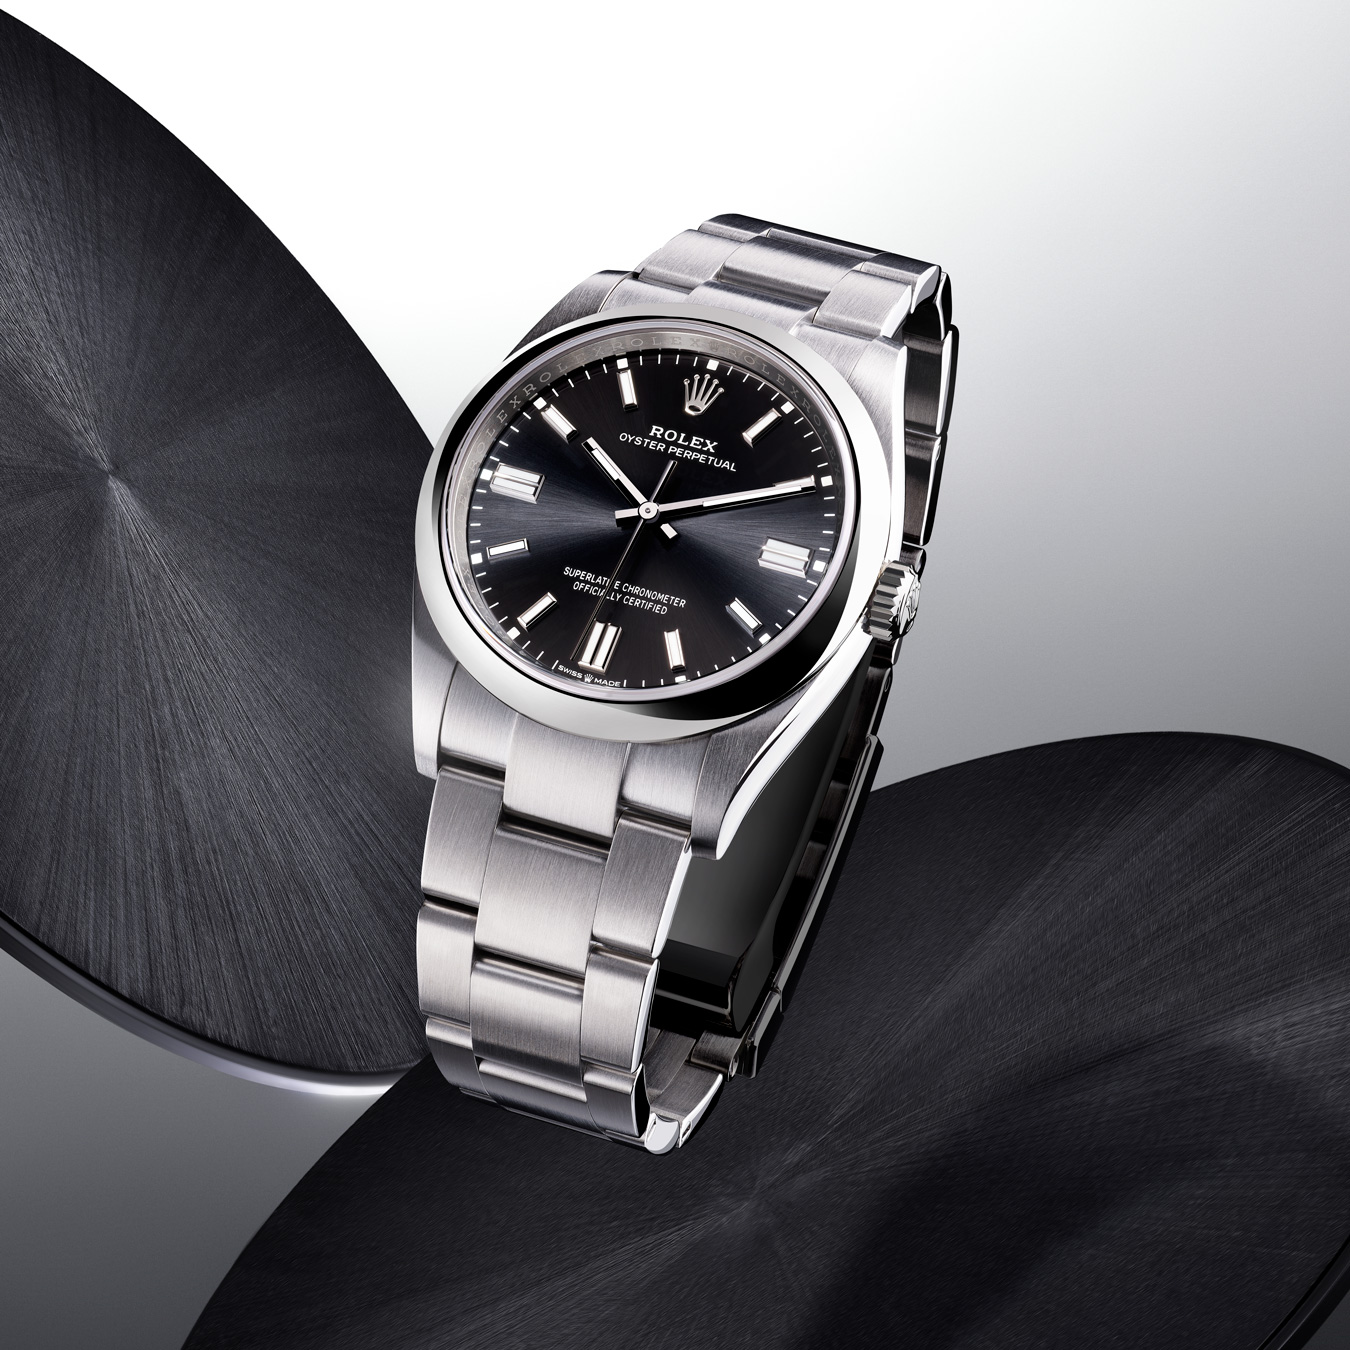 Rolex Oyster Perpetual, dynamic and timeless